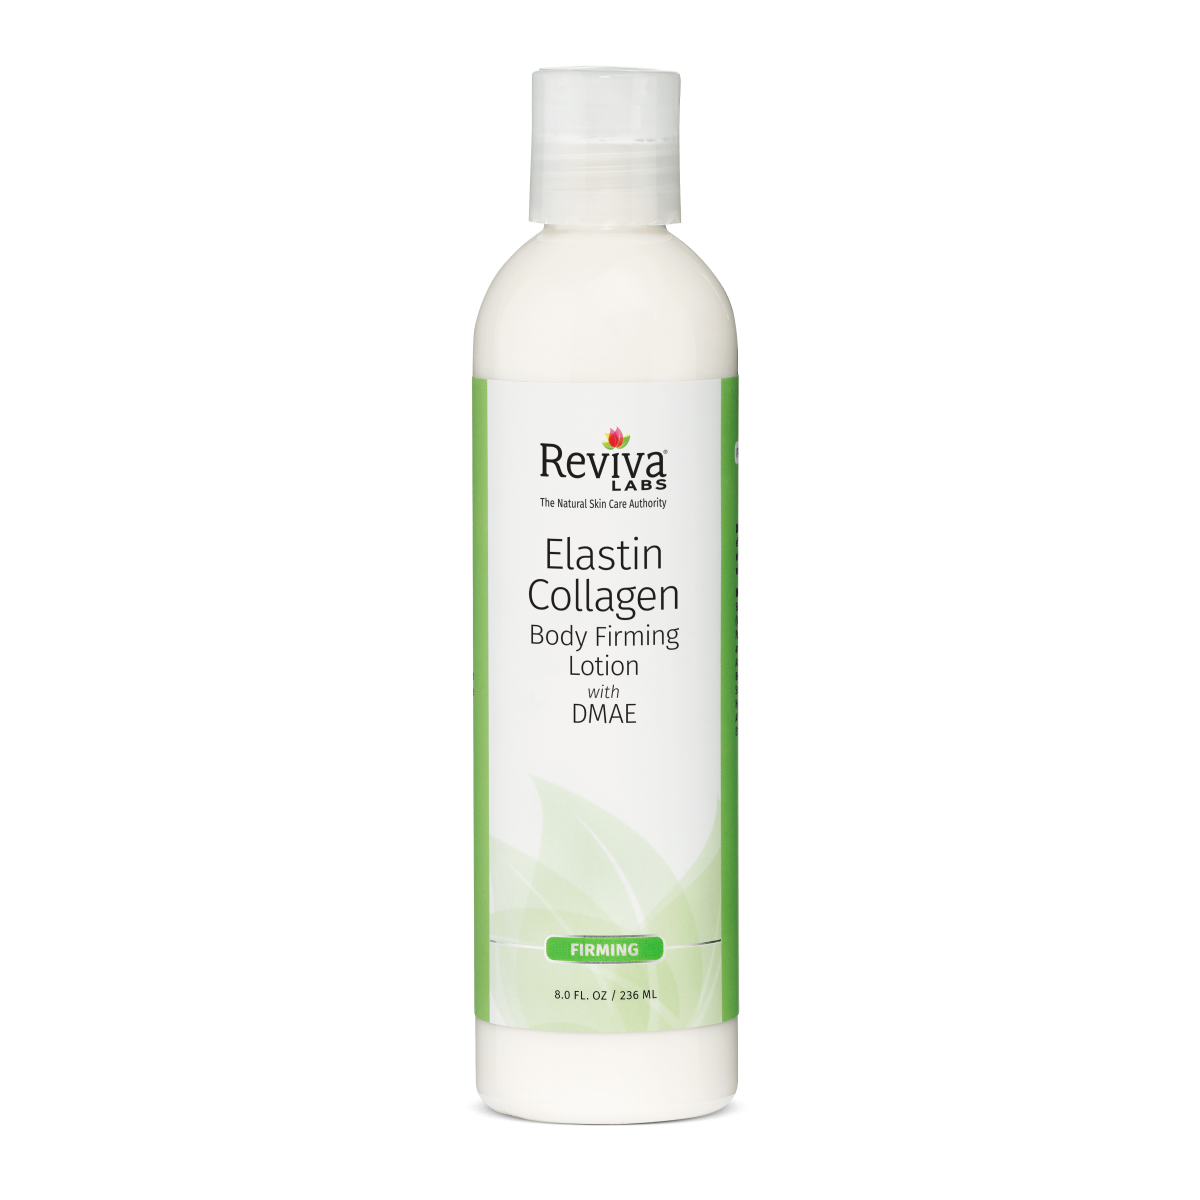 Primary Image of Elastin Collagen Body Firming Lotion